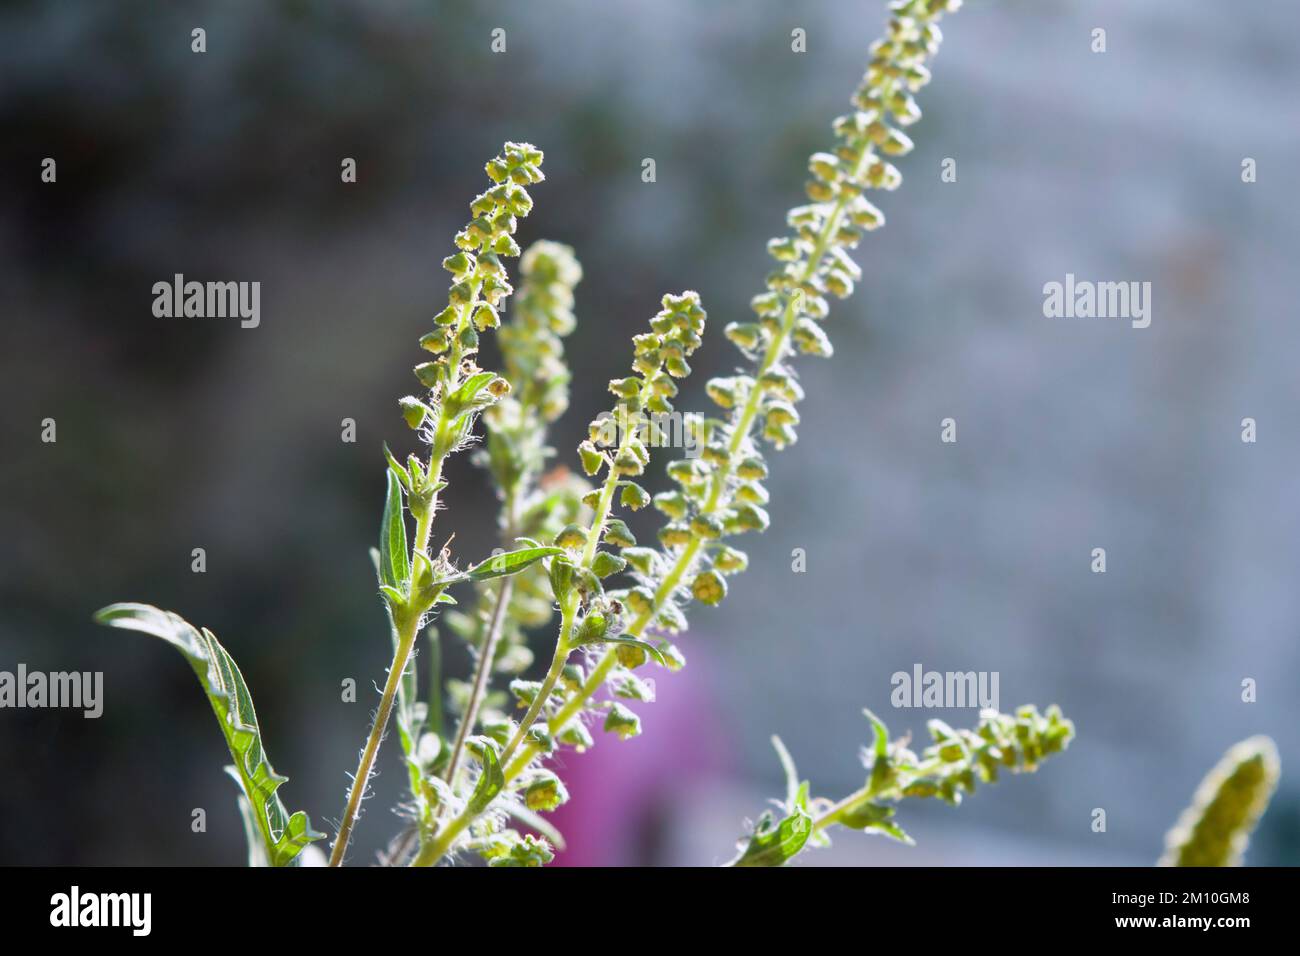 Close up photo of ragweed flowers. The ragweed pollen is notorious for causing allergic reactions in humans, specifically allergic rhinitis. Stock Photo